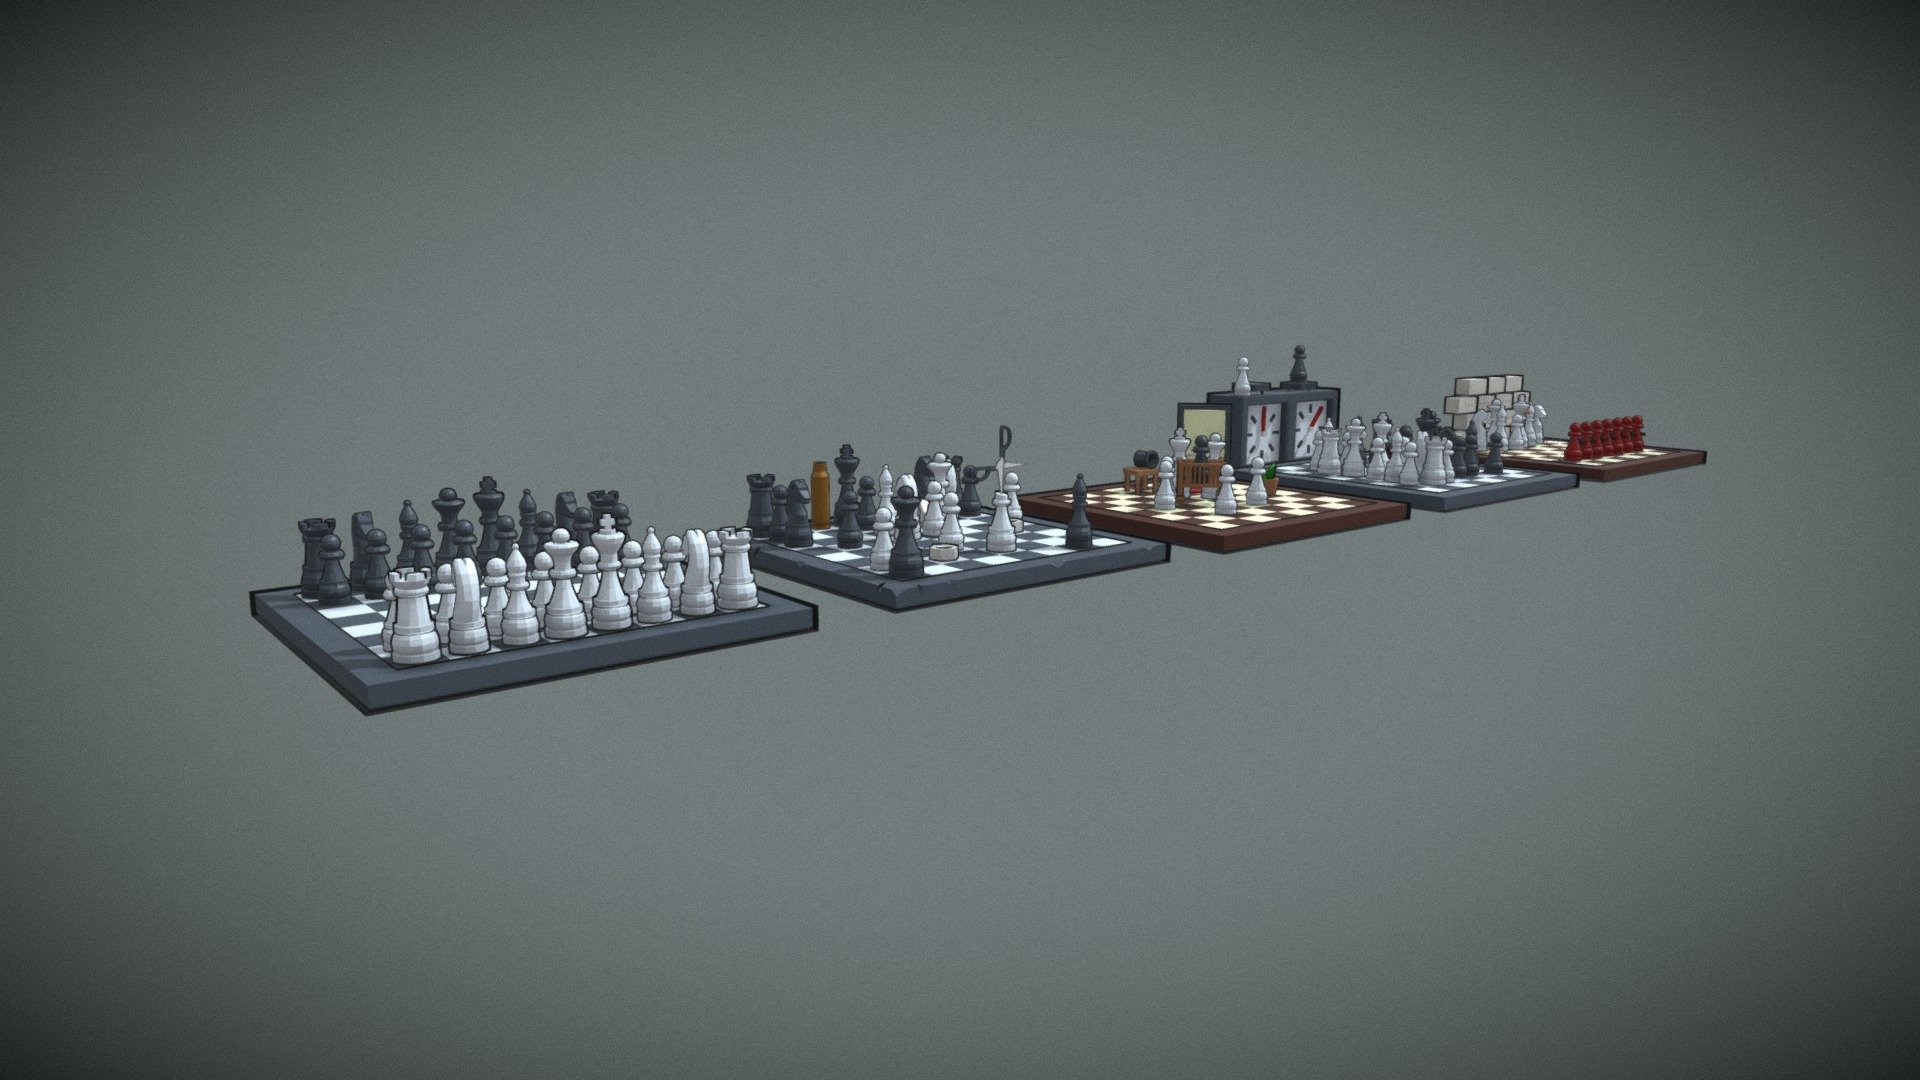 ION M.G Chess download the last version for windows